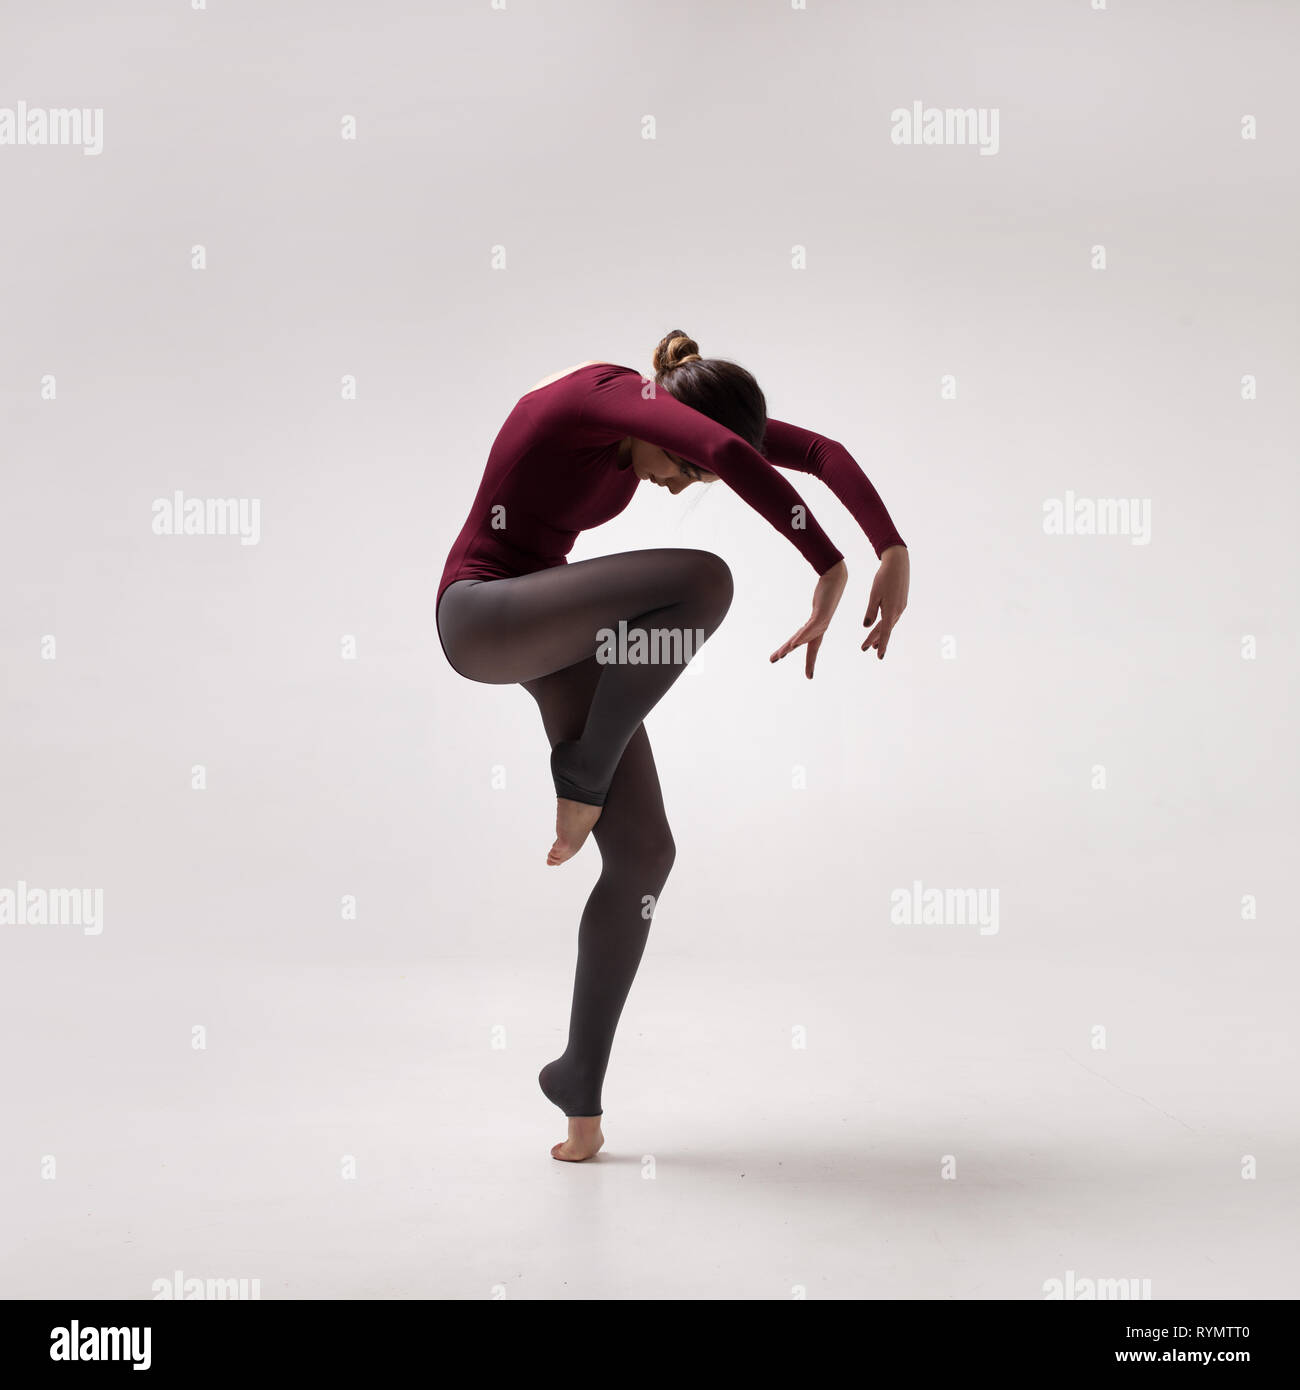 young woman dancer in maroon swimsuit jumping Stock Photo